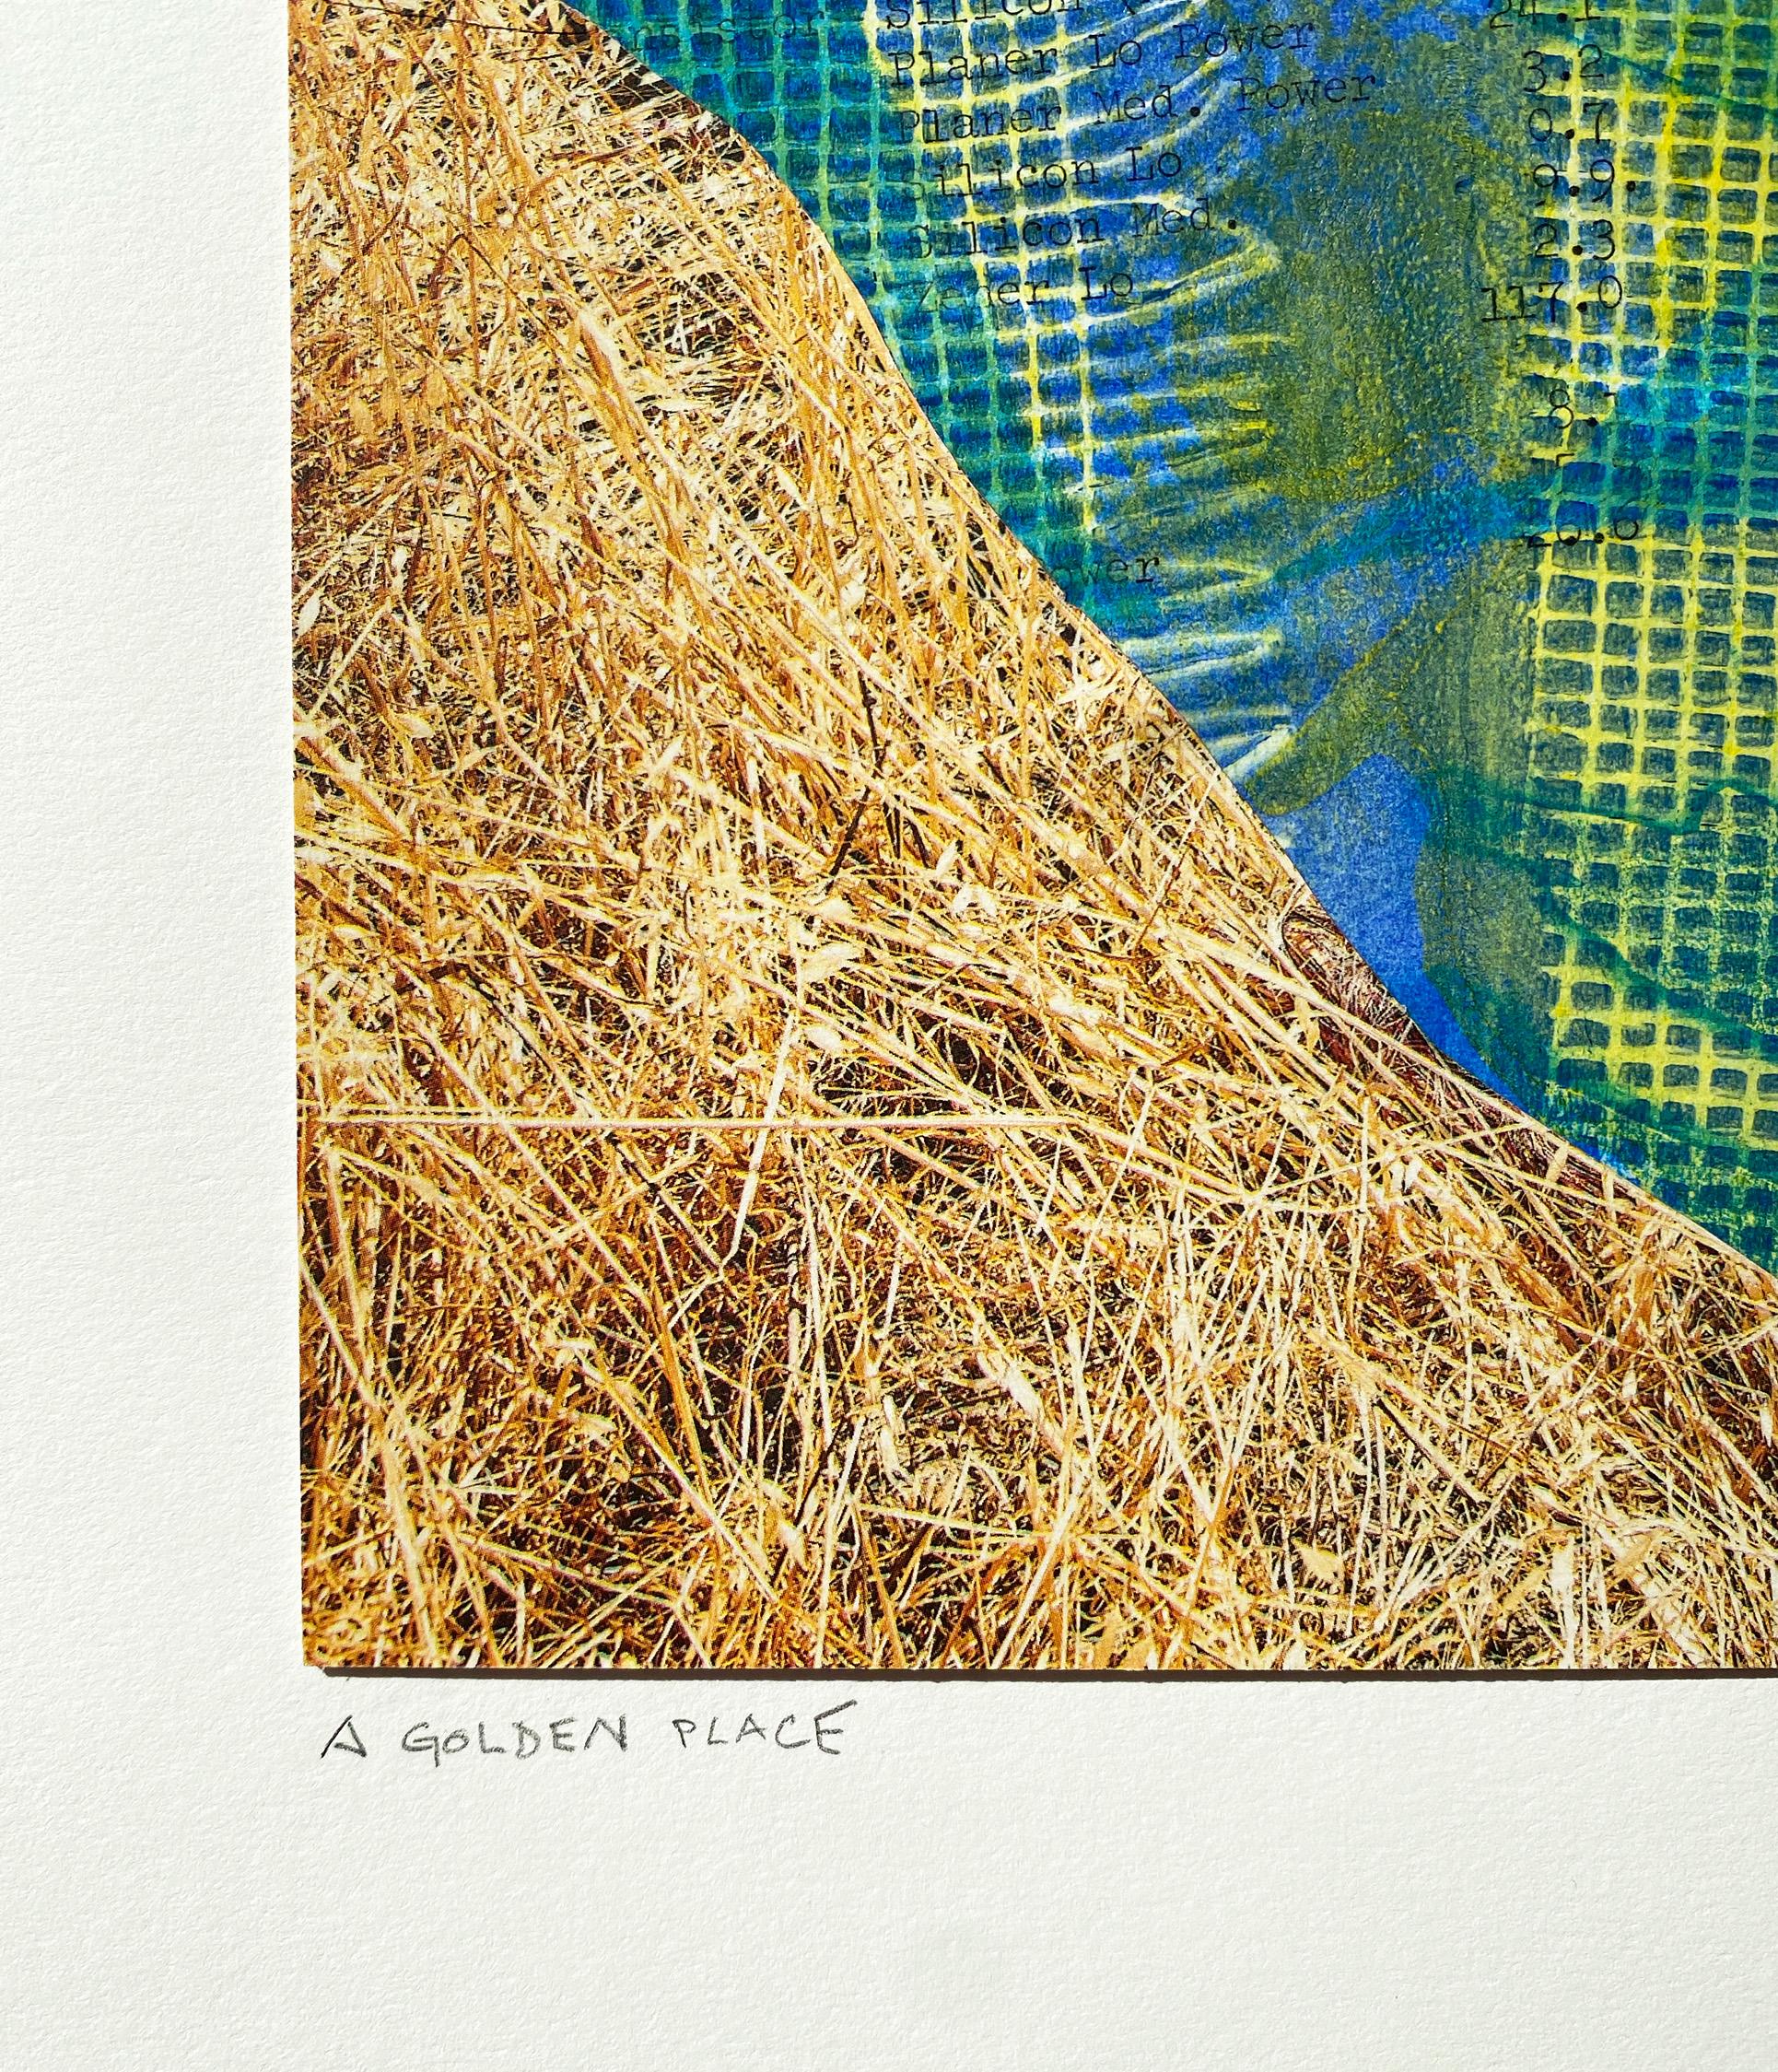 Monica DeSalvo’s “A Golden Place” is a 16 x 12 inch abstract minimalist collage on paper with a golden wheat field, a bold graphic shape containing bright blue and green impressions of frayed burlap printed on a vintage xerox, an inverted black